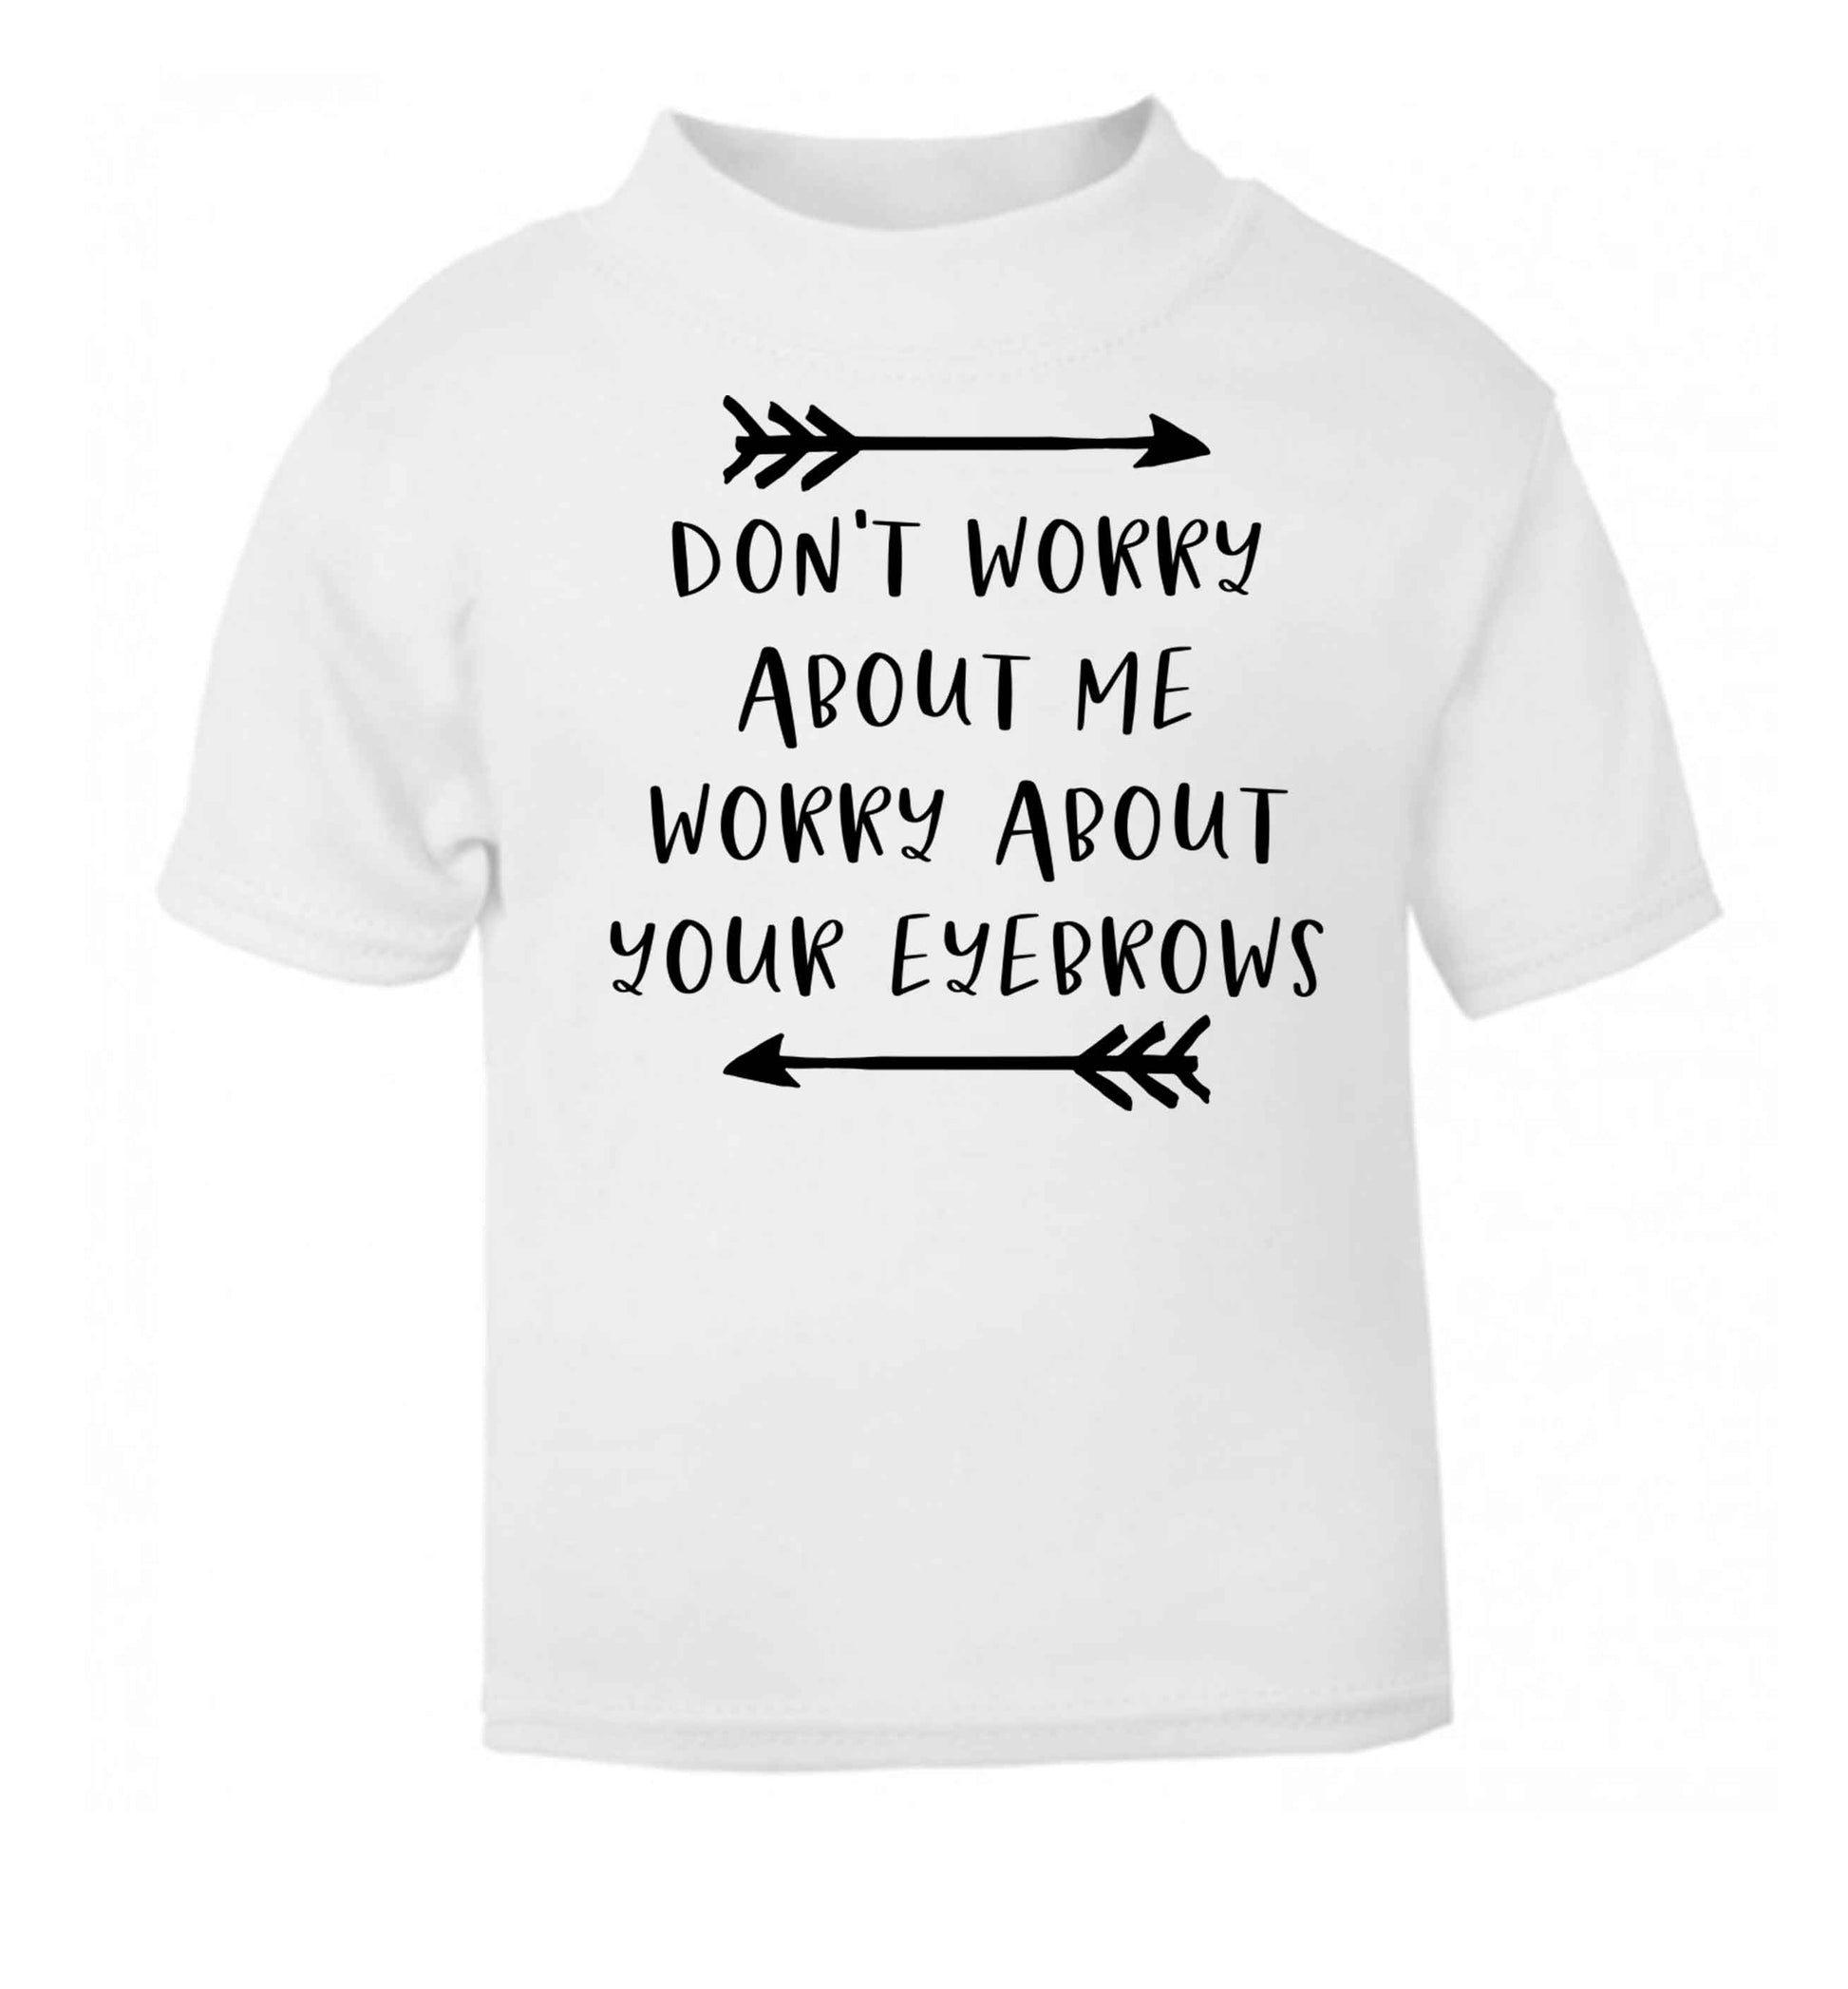 Don't worry about me worry about your eyebrows white baby toddler Tshirt 2 Years